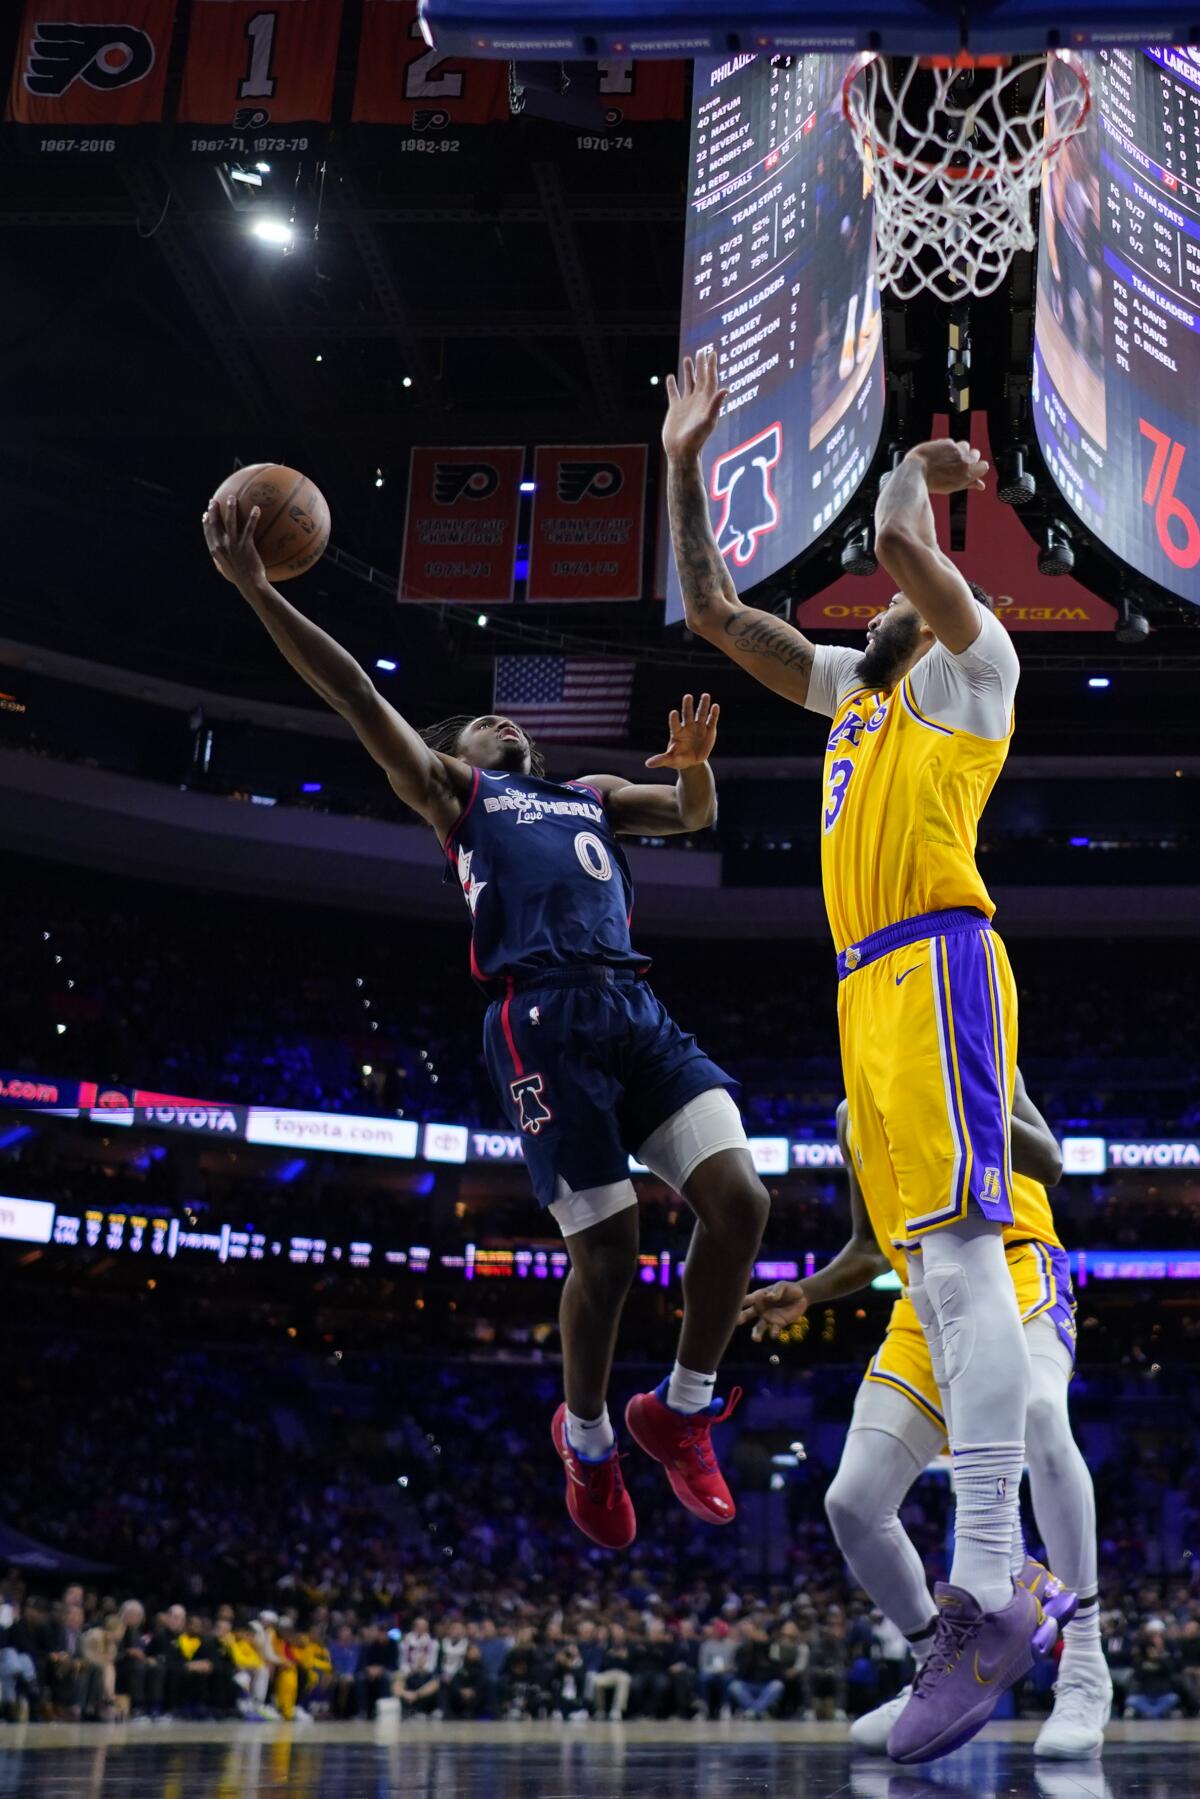 Philadelphia's Tyrese Maxey goes up for a shot against Lakers star Anthony Davis during Monday's game.